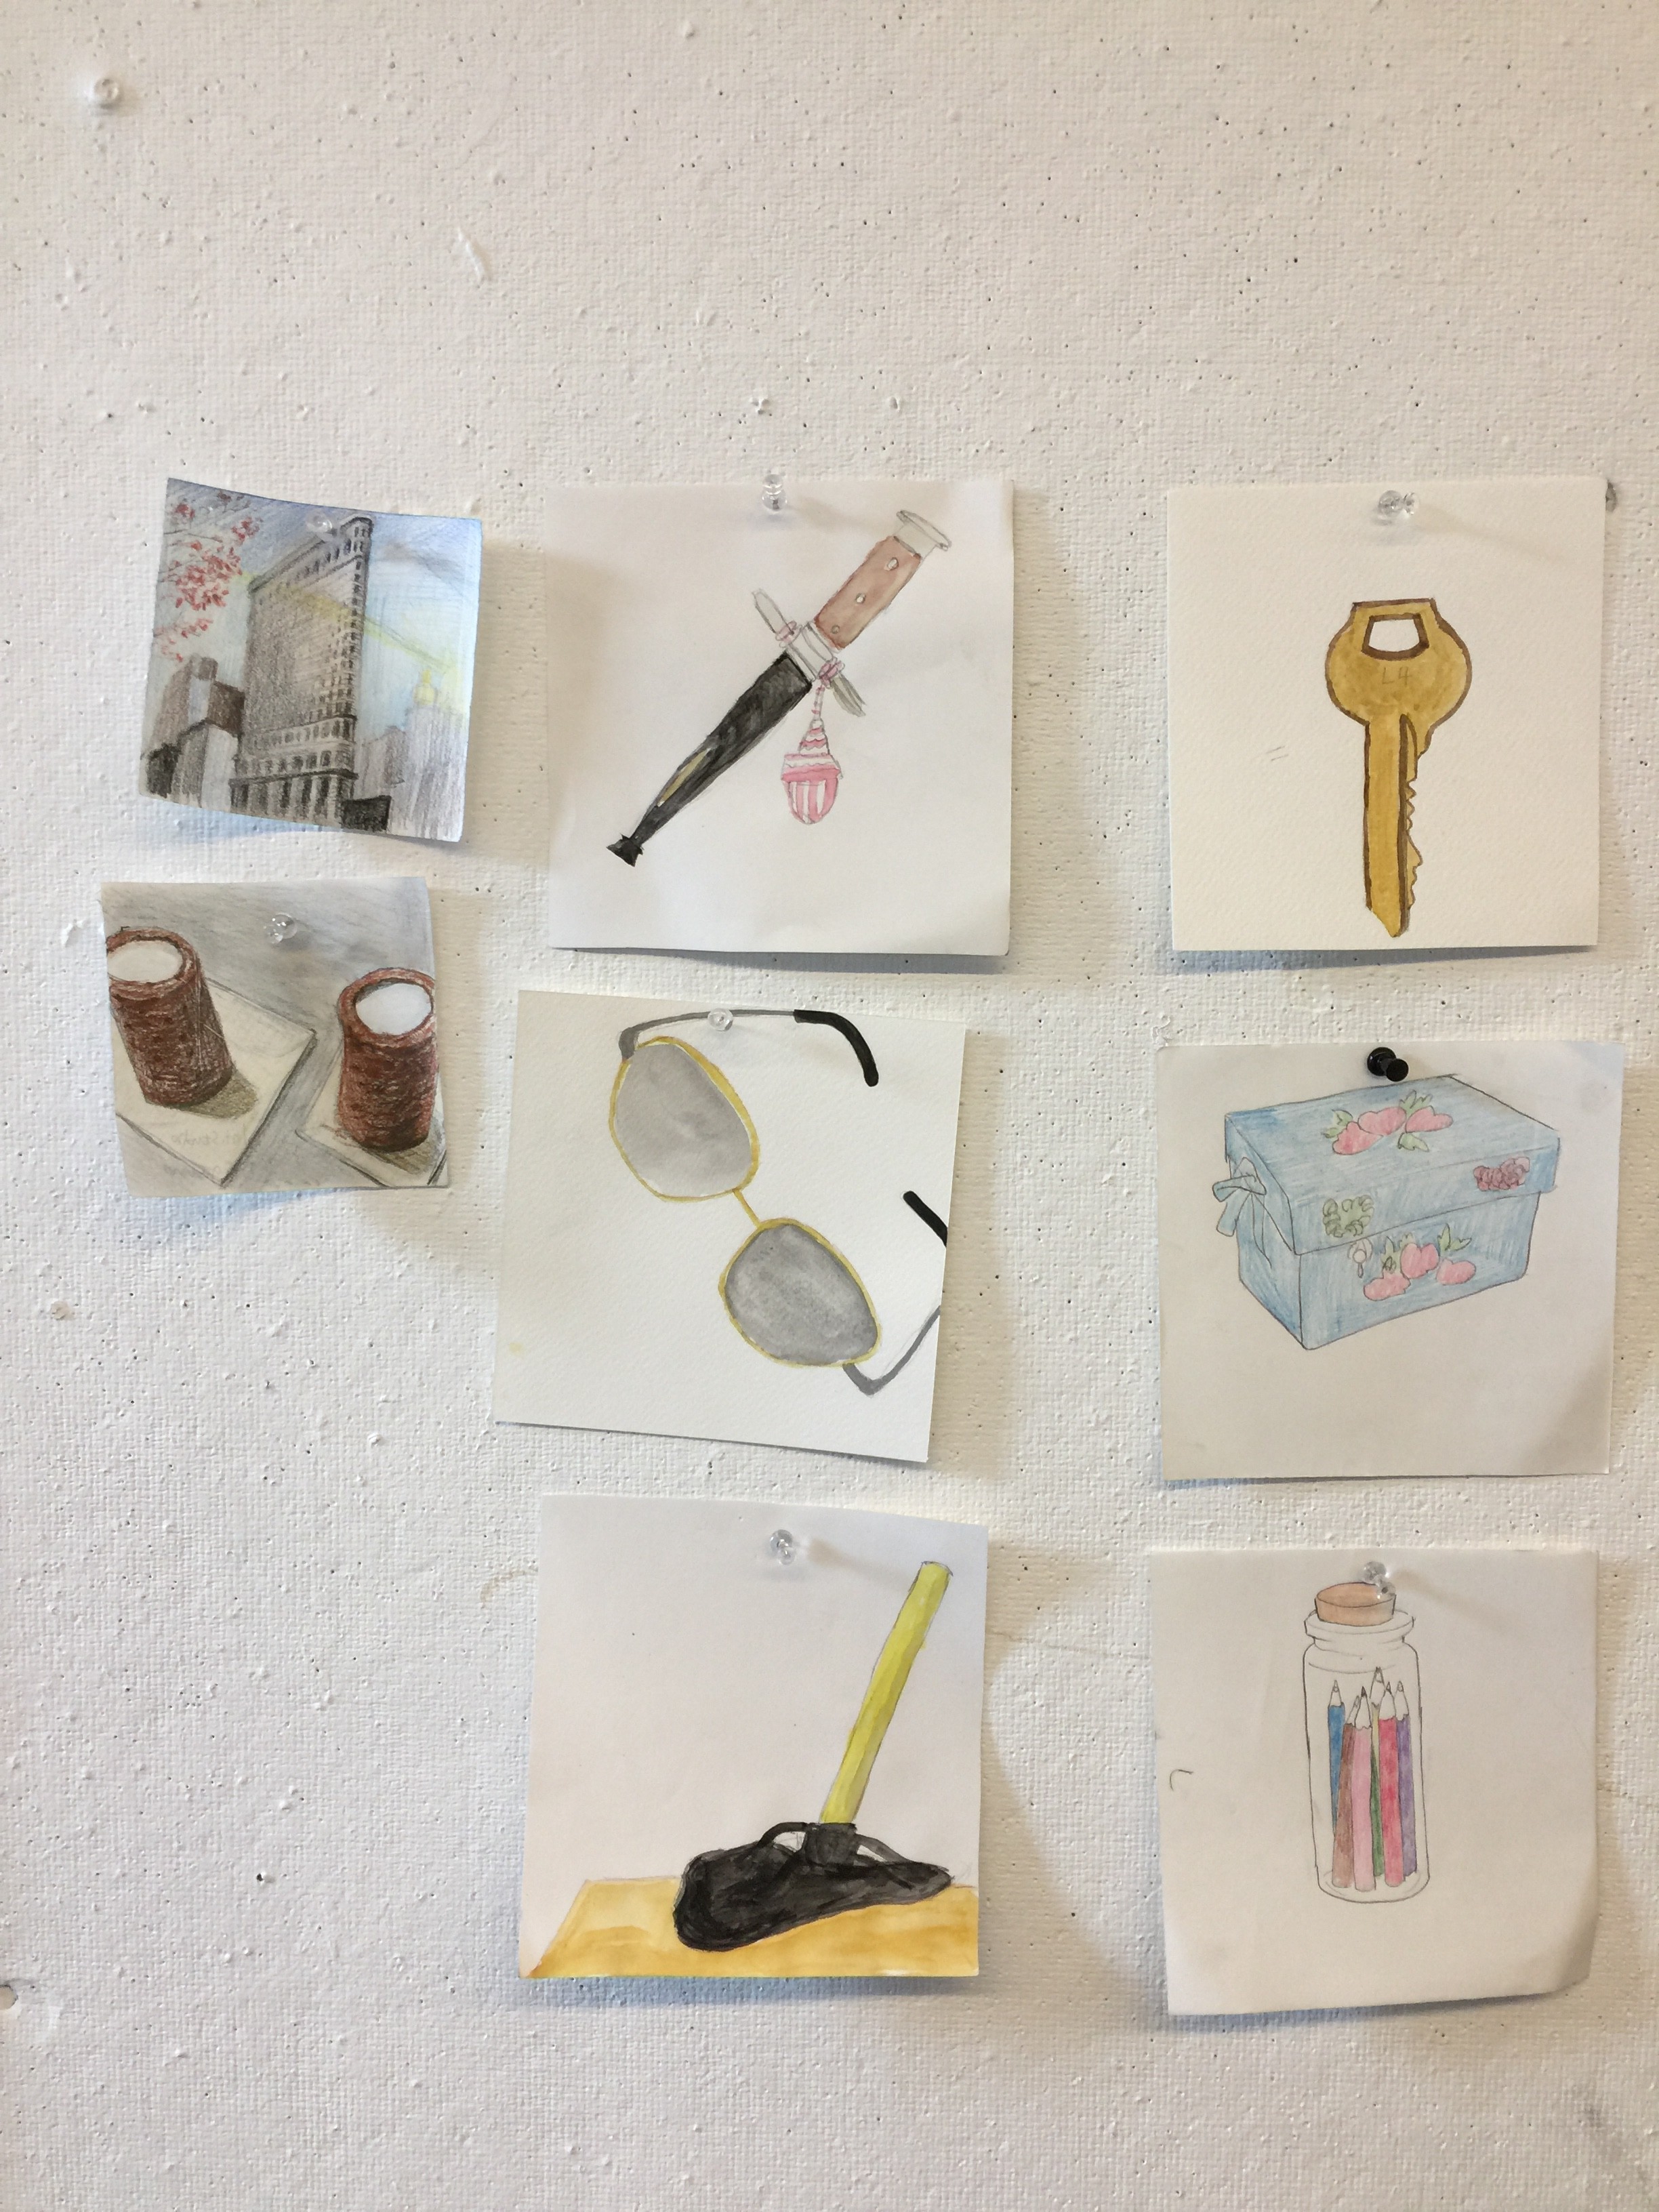 Int. Studio: Selected Narrative Objects